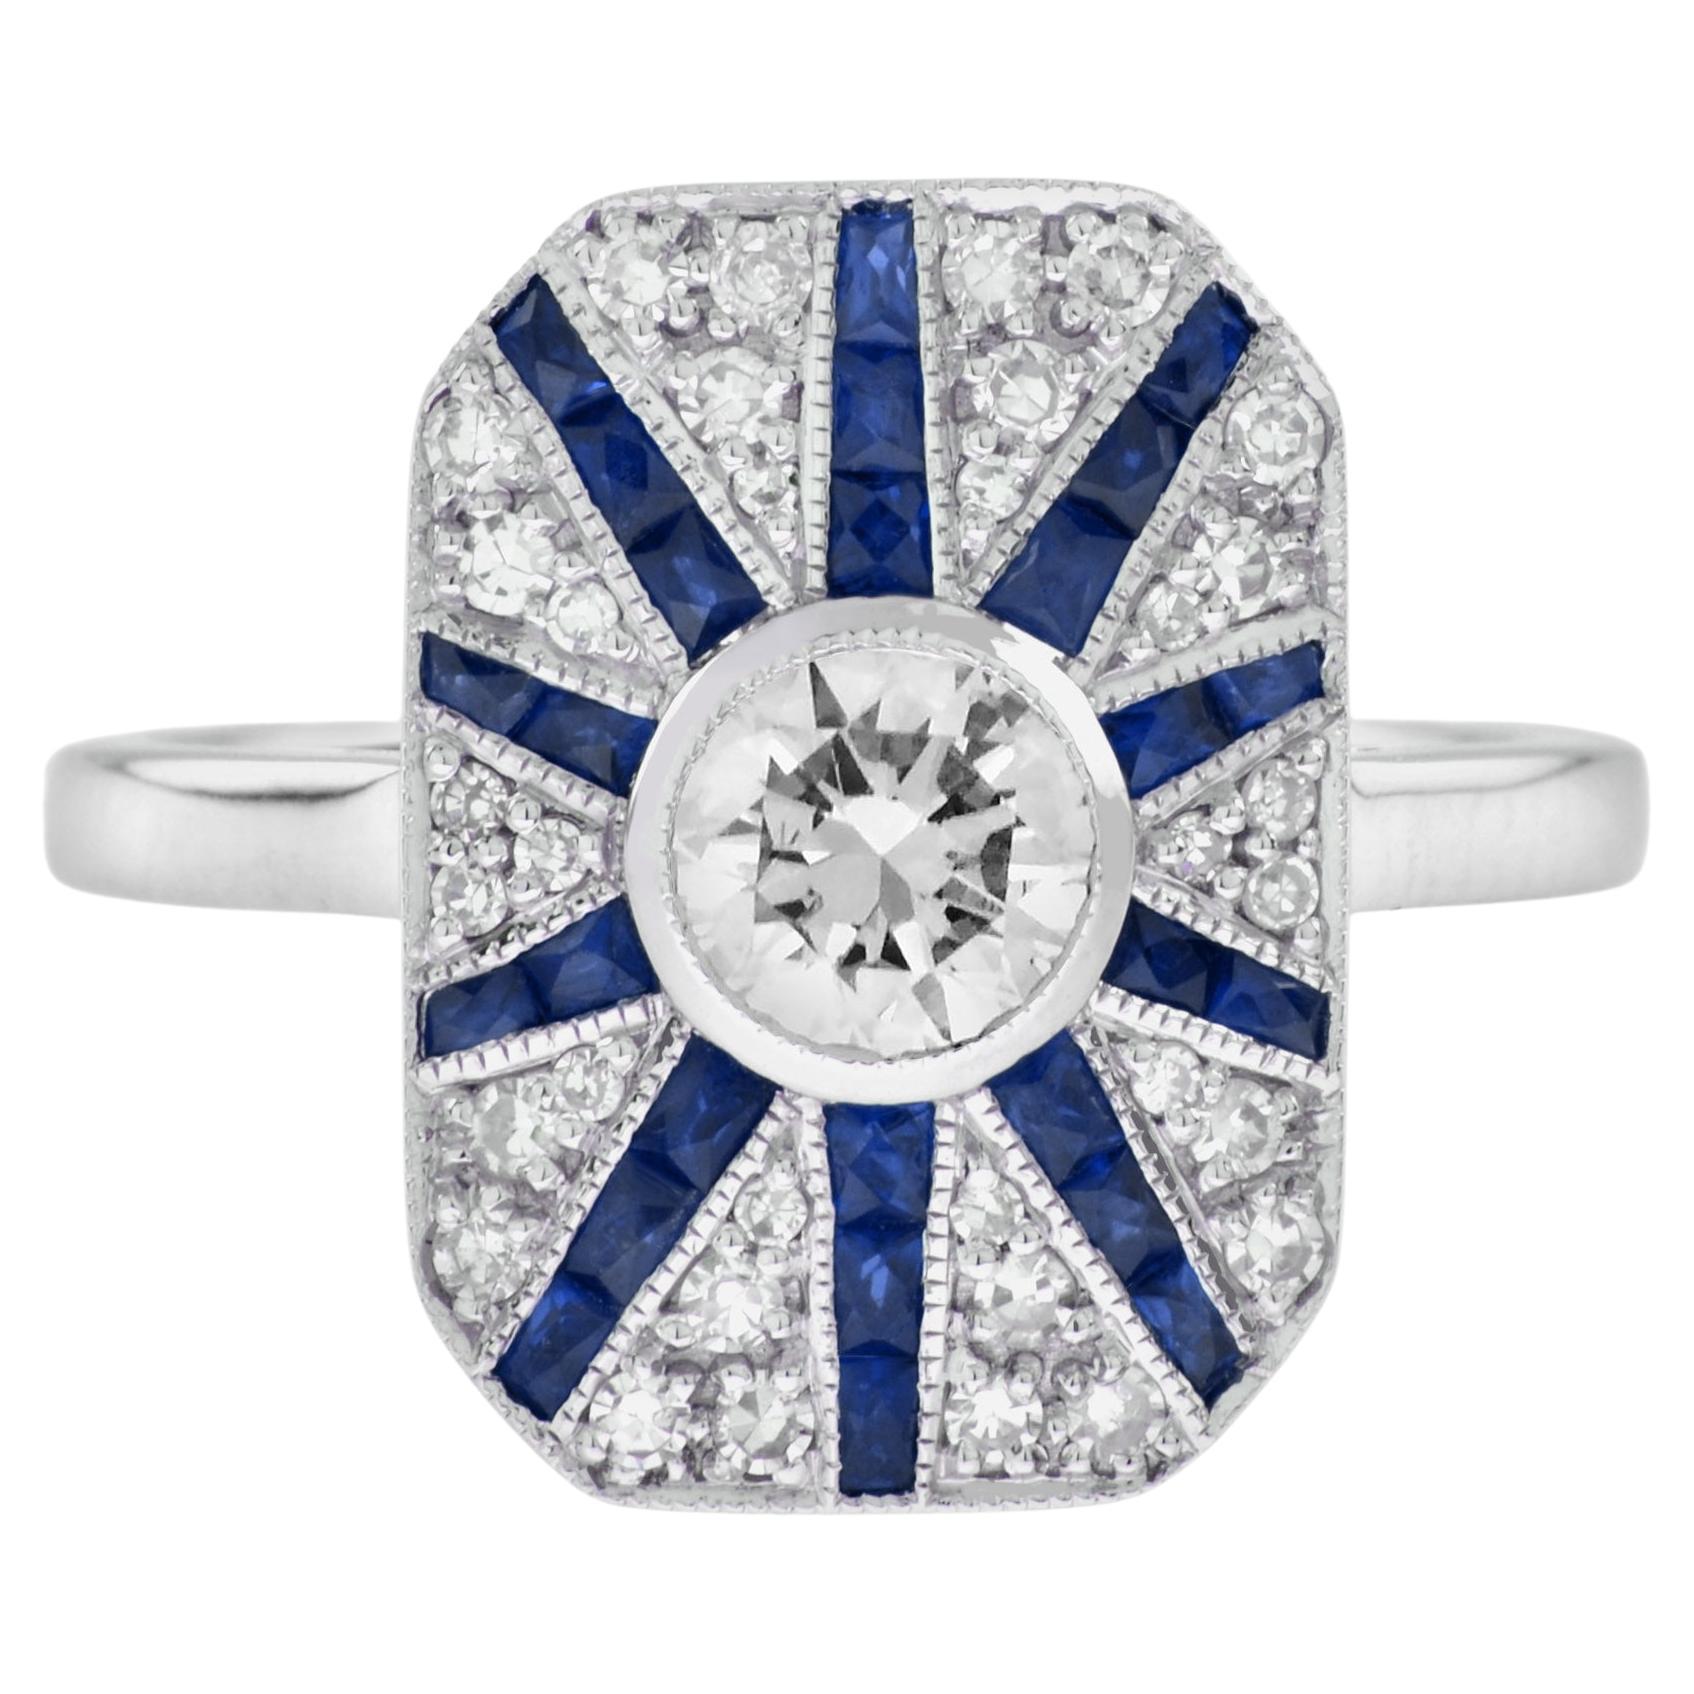 Diamond and Blue Sapphire Art Deco Style Halo Ring in 18K White Gold